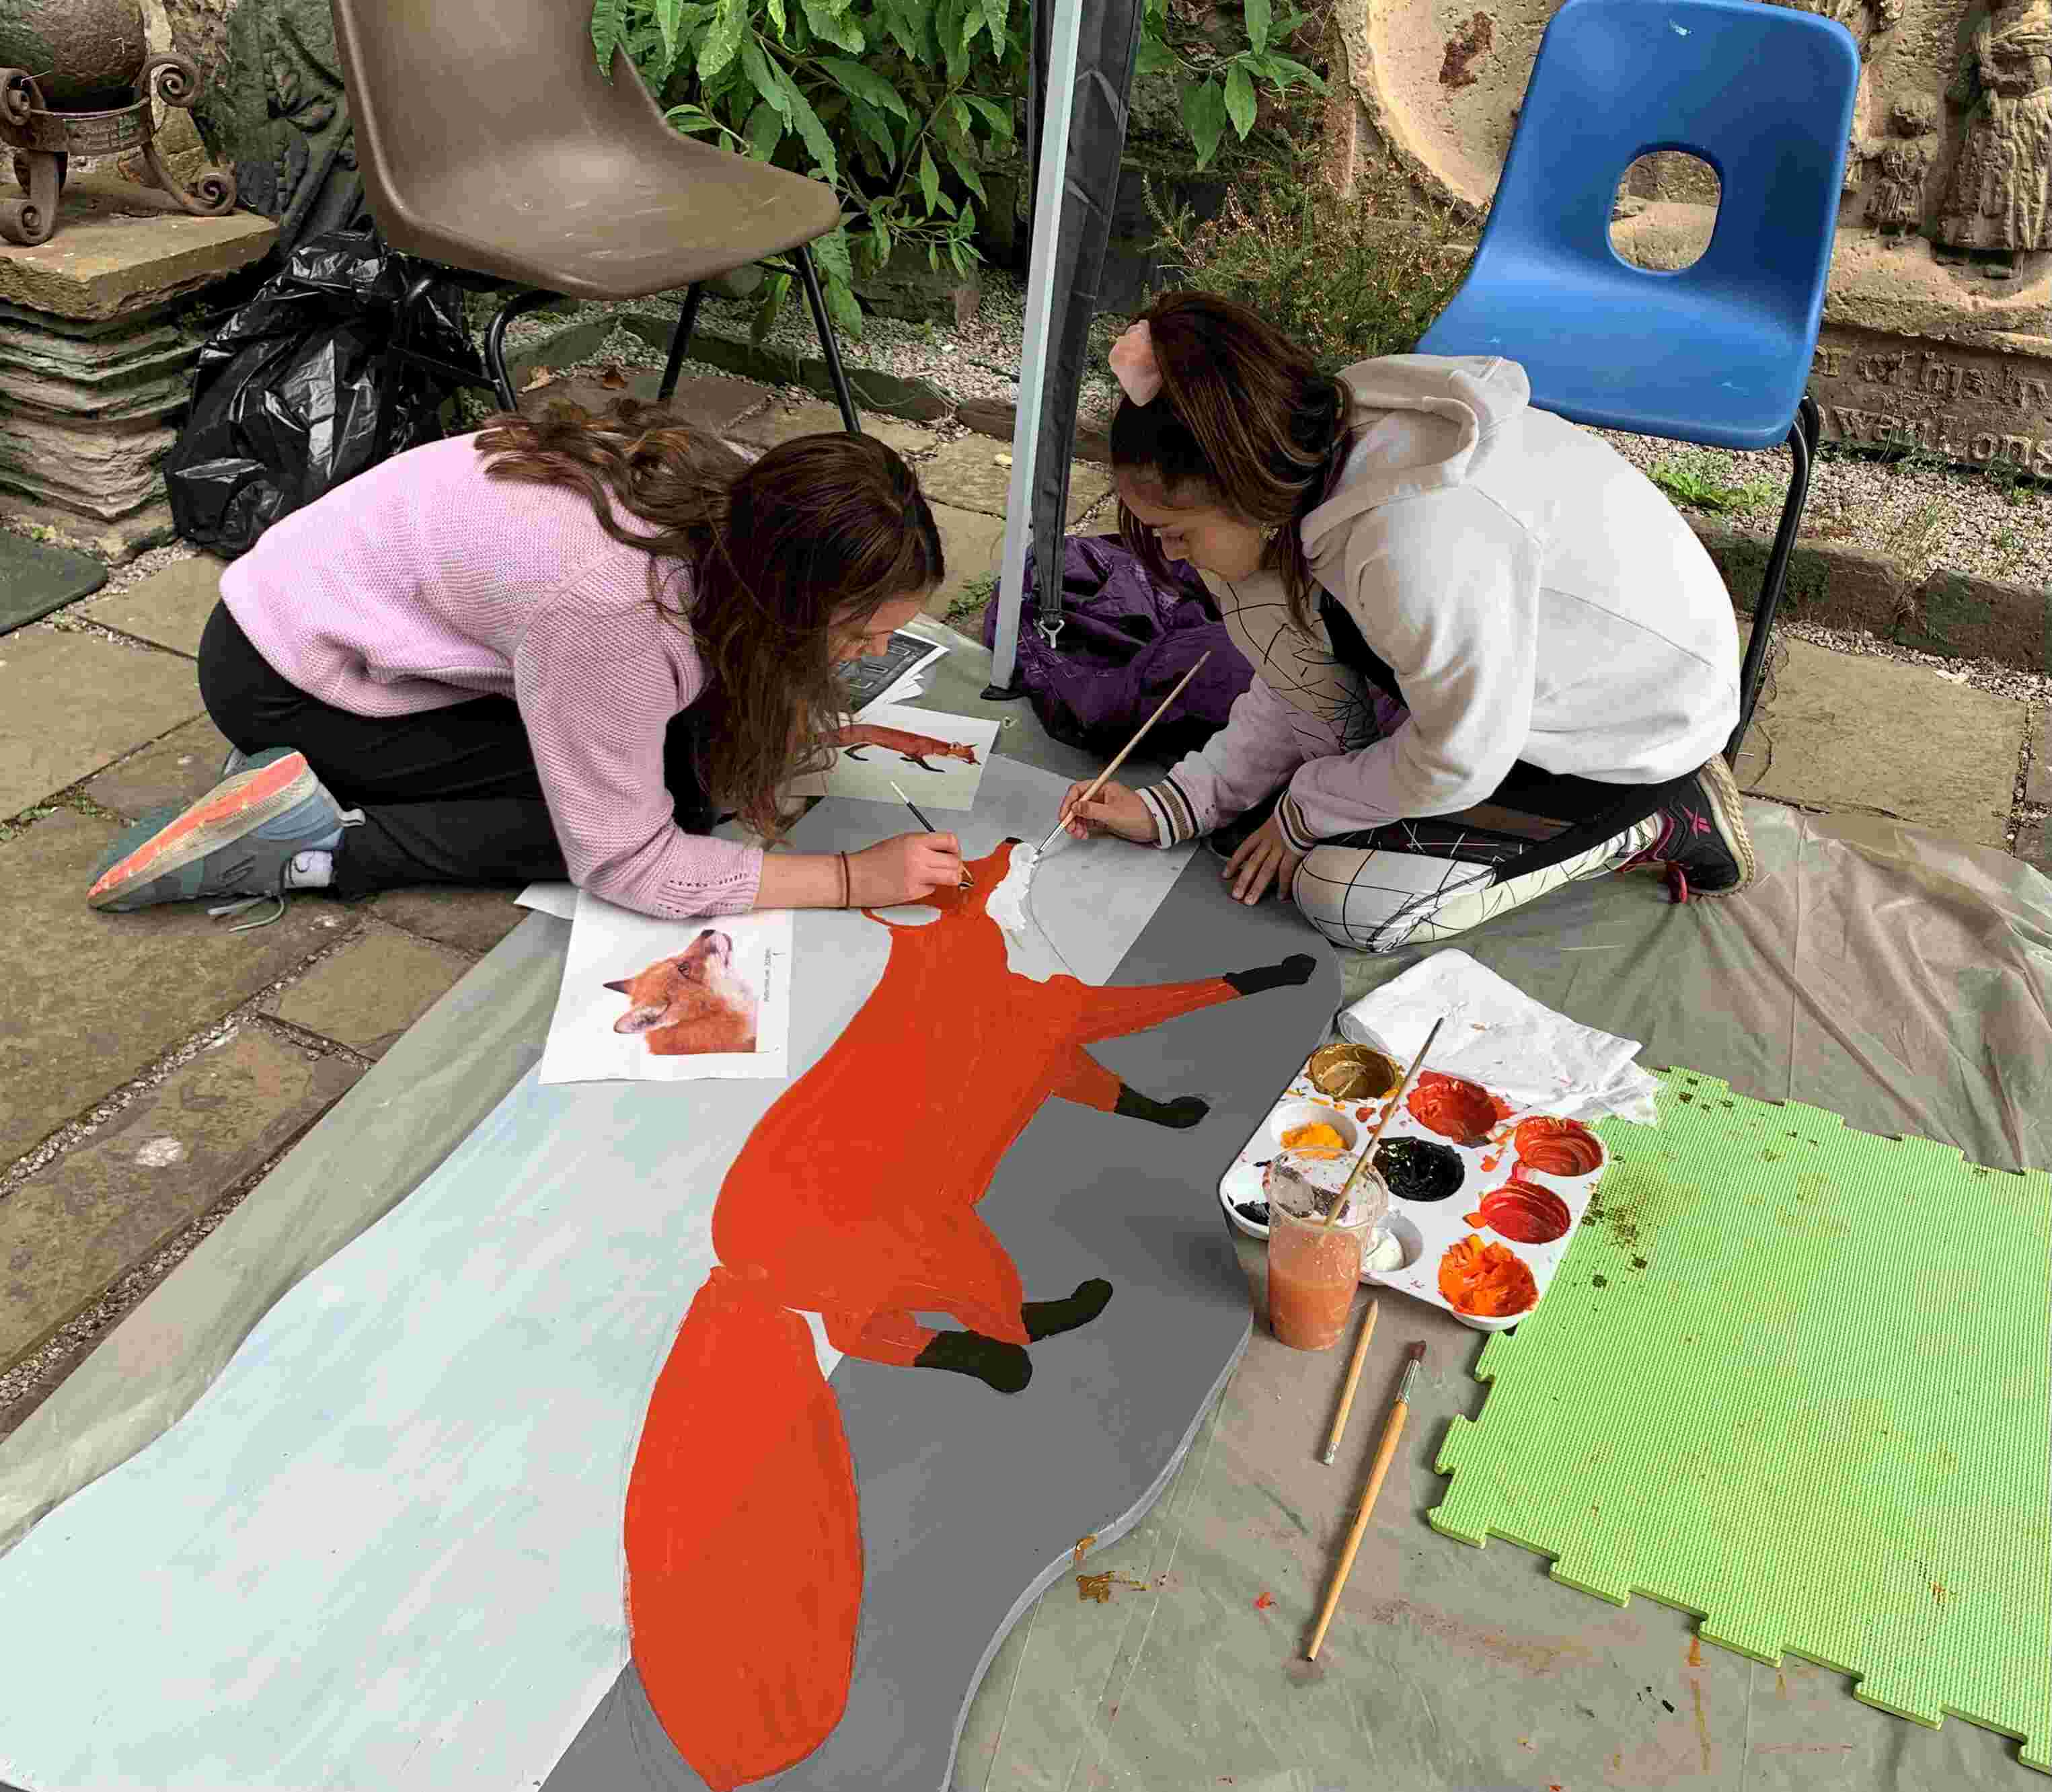 Two girls kneeling on the ground painting a fox on to a wooden board.